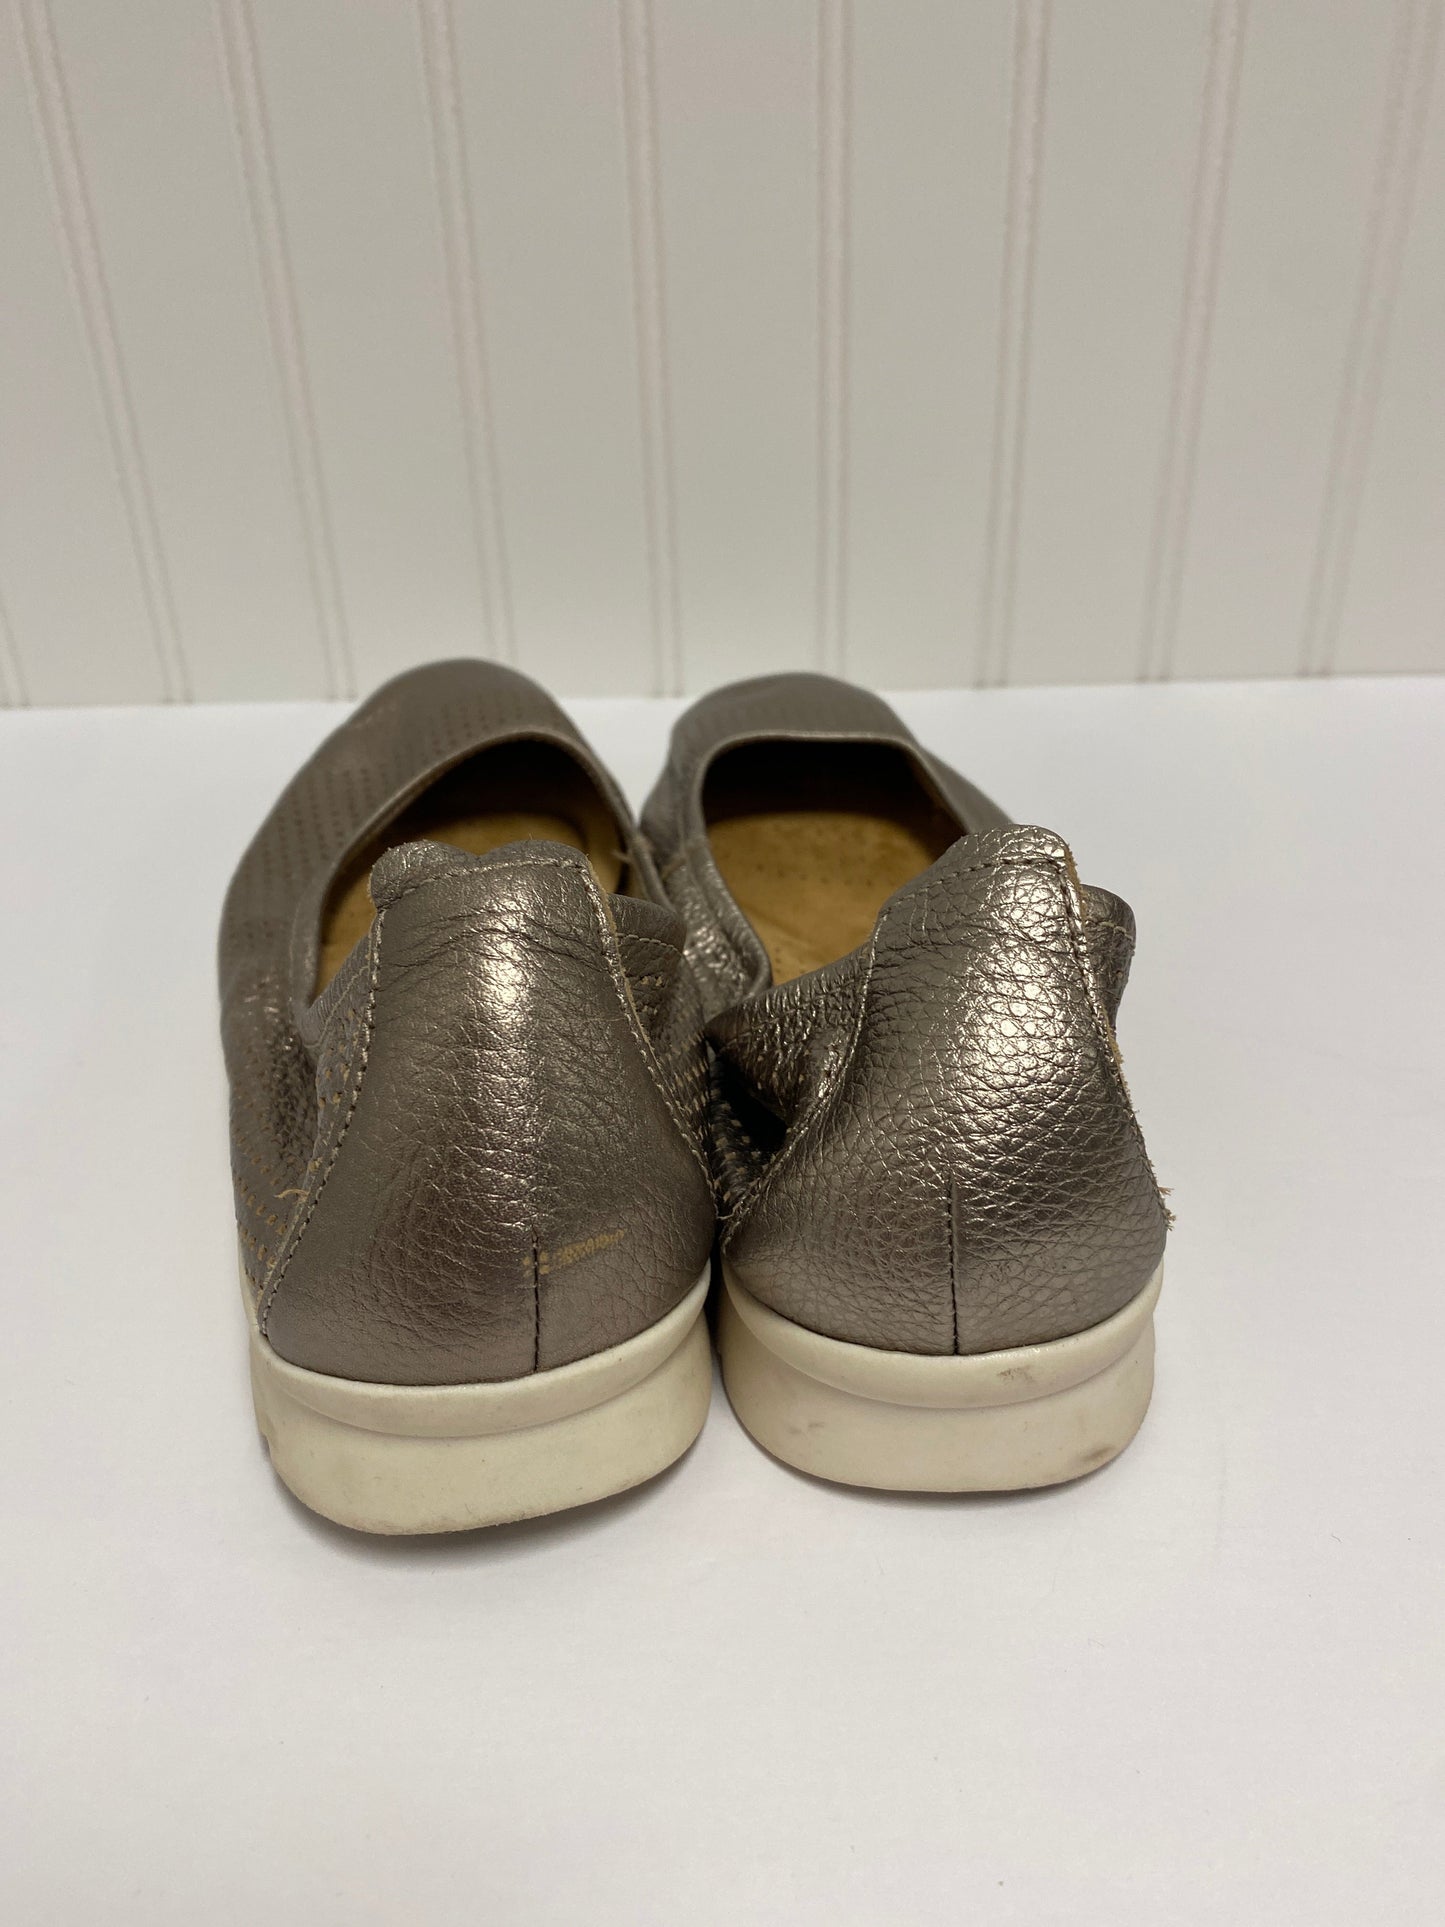 Shoes Flats By Clarks  Size: 7